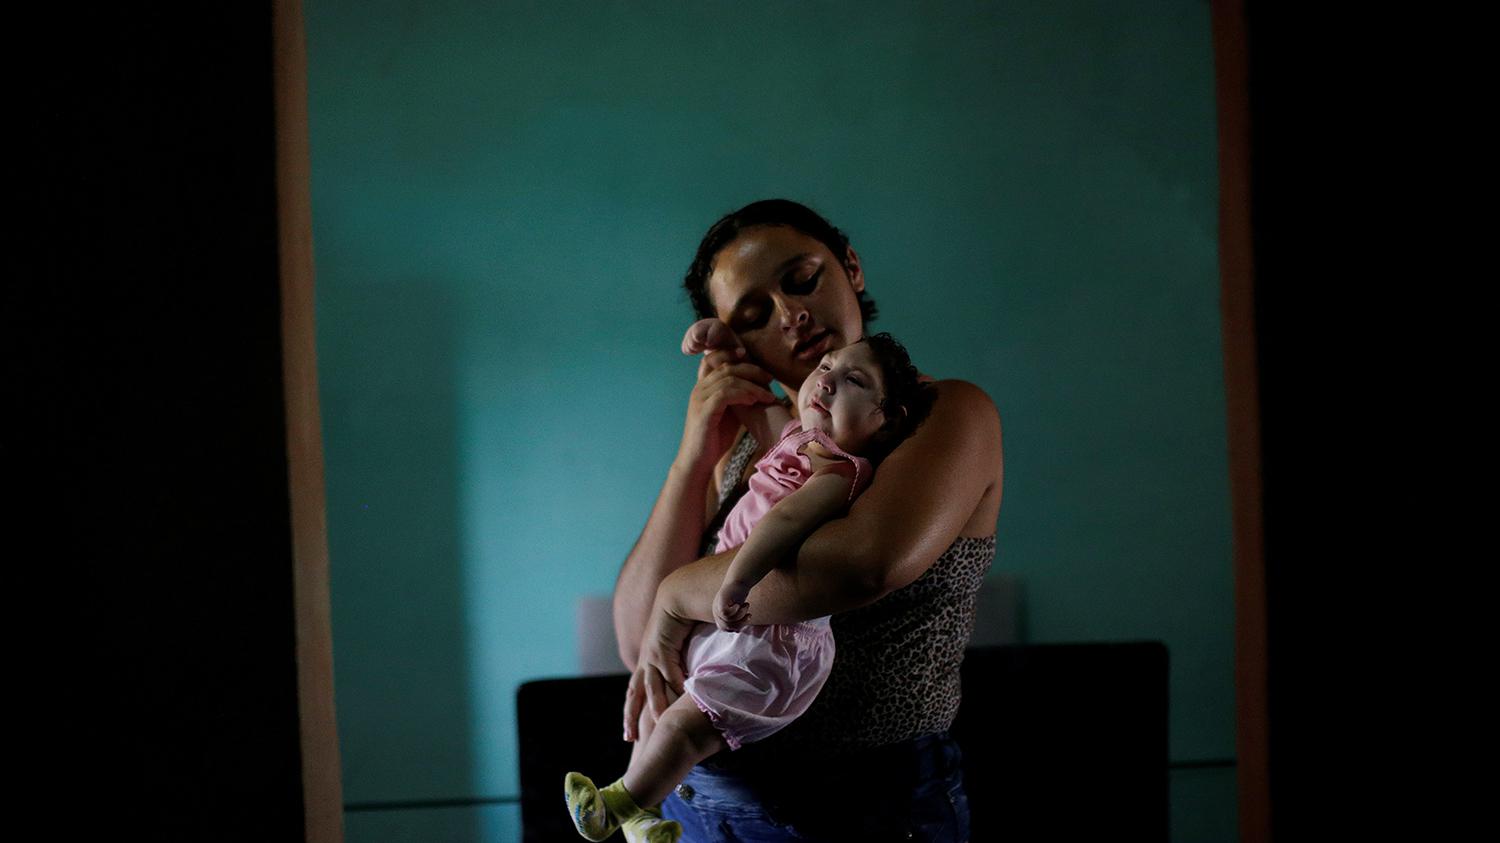 Raquel, 25, holds her daughter Heloisa in Areia, Paraíba state, Brazil. Raquel gave birth to twin daughters with Zika syndrome in April 2016. “I want to give my best to my daughters,” she said in an interview with Human Rights Watch. 